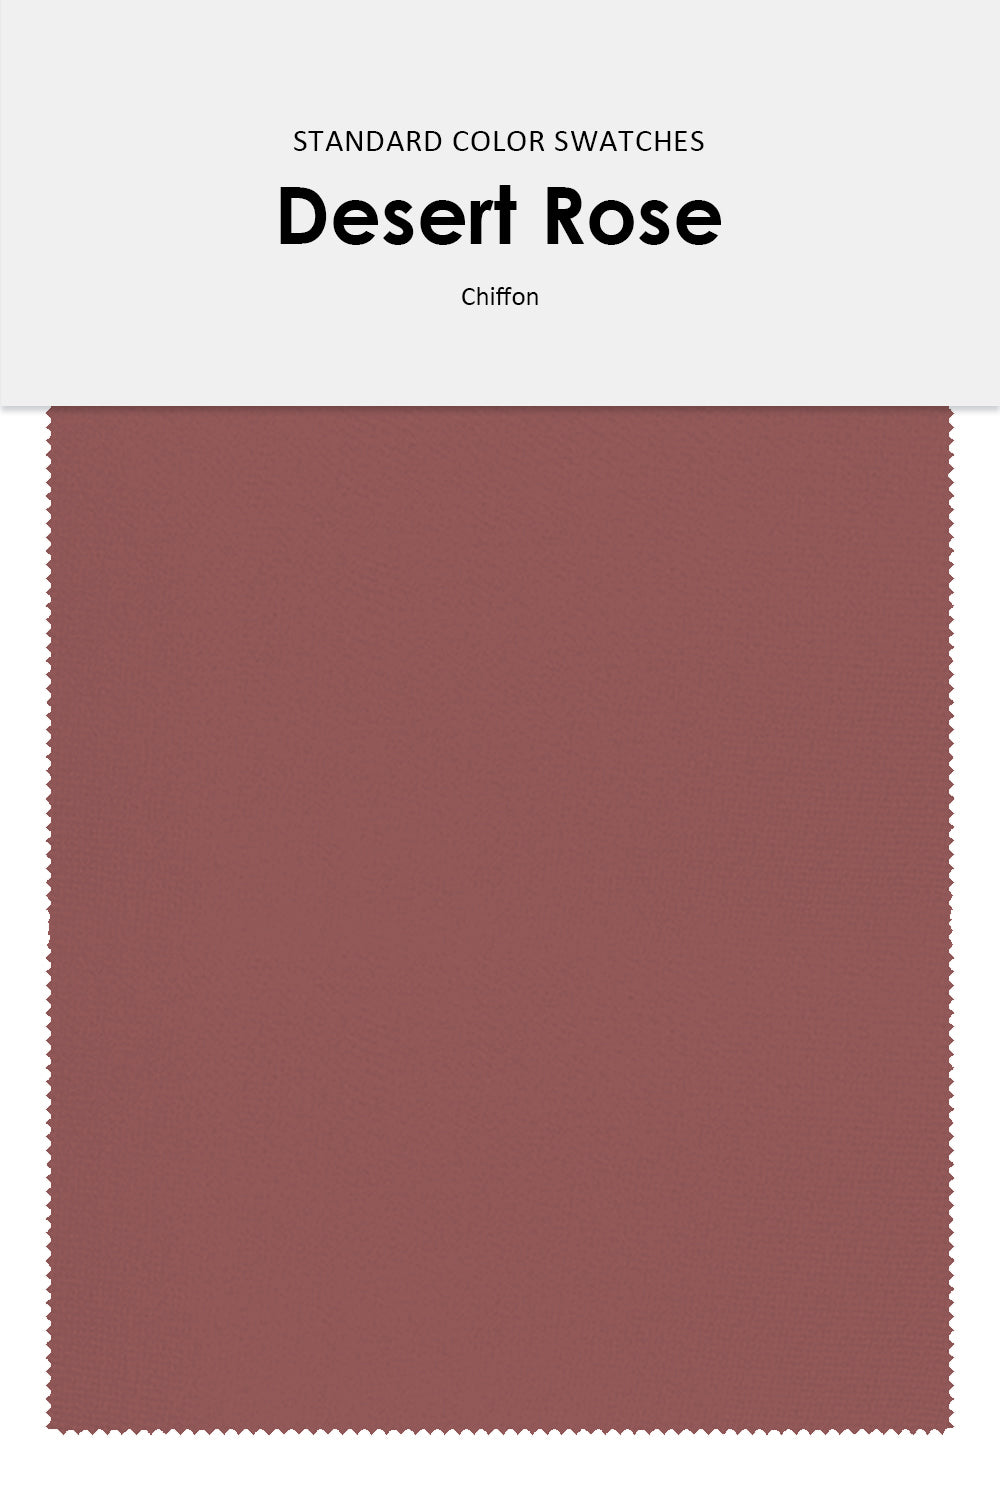 Chiffon Fabric Color Swatches